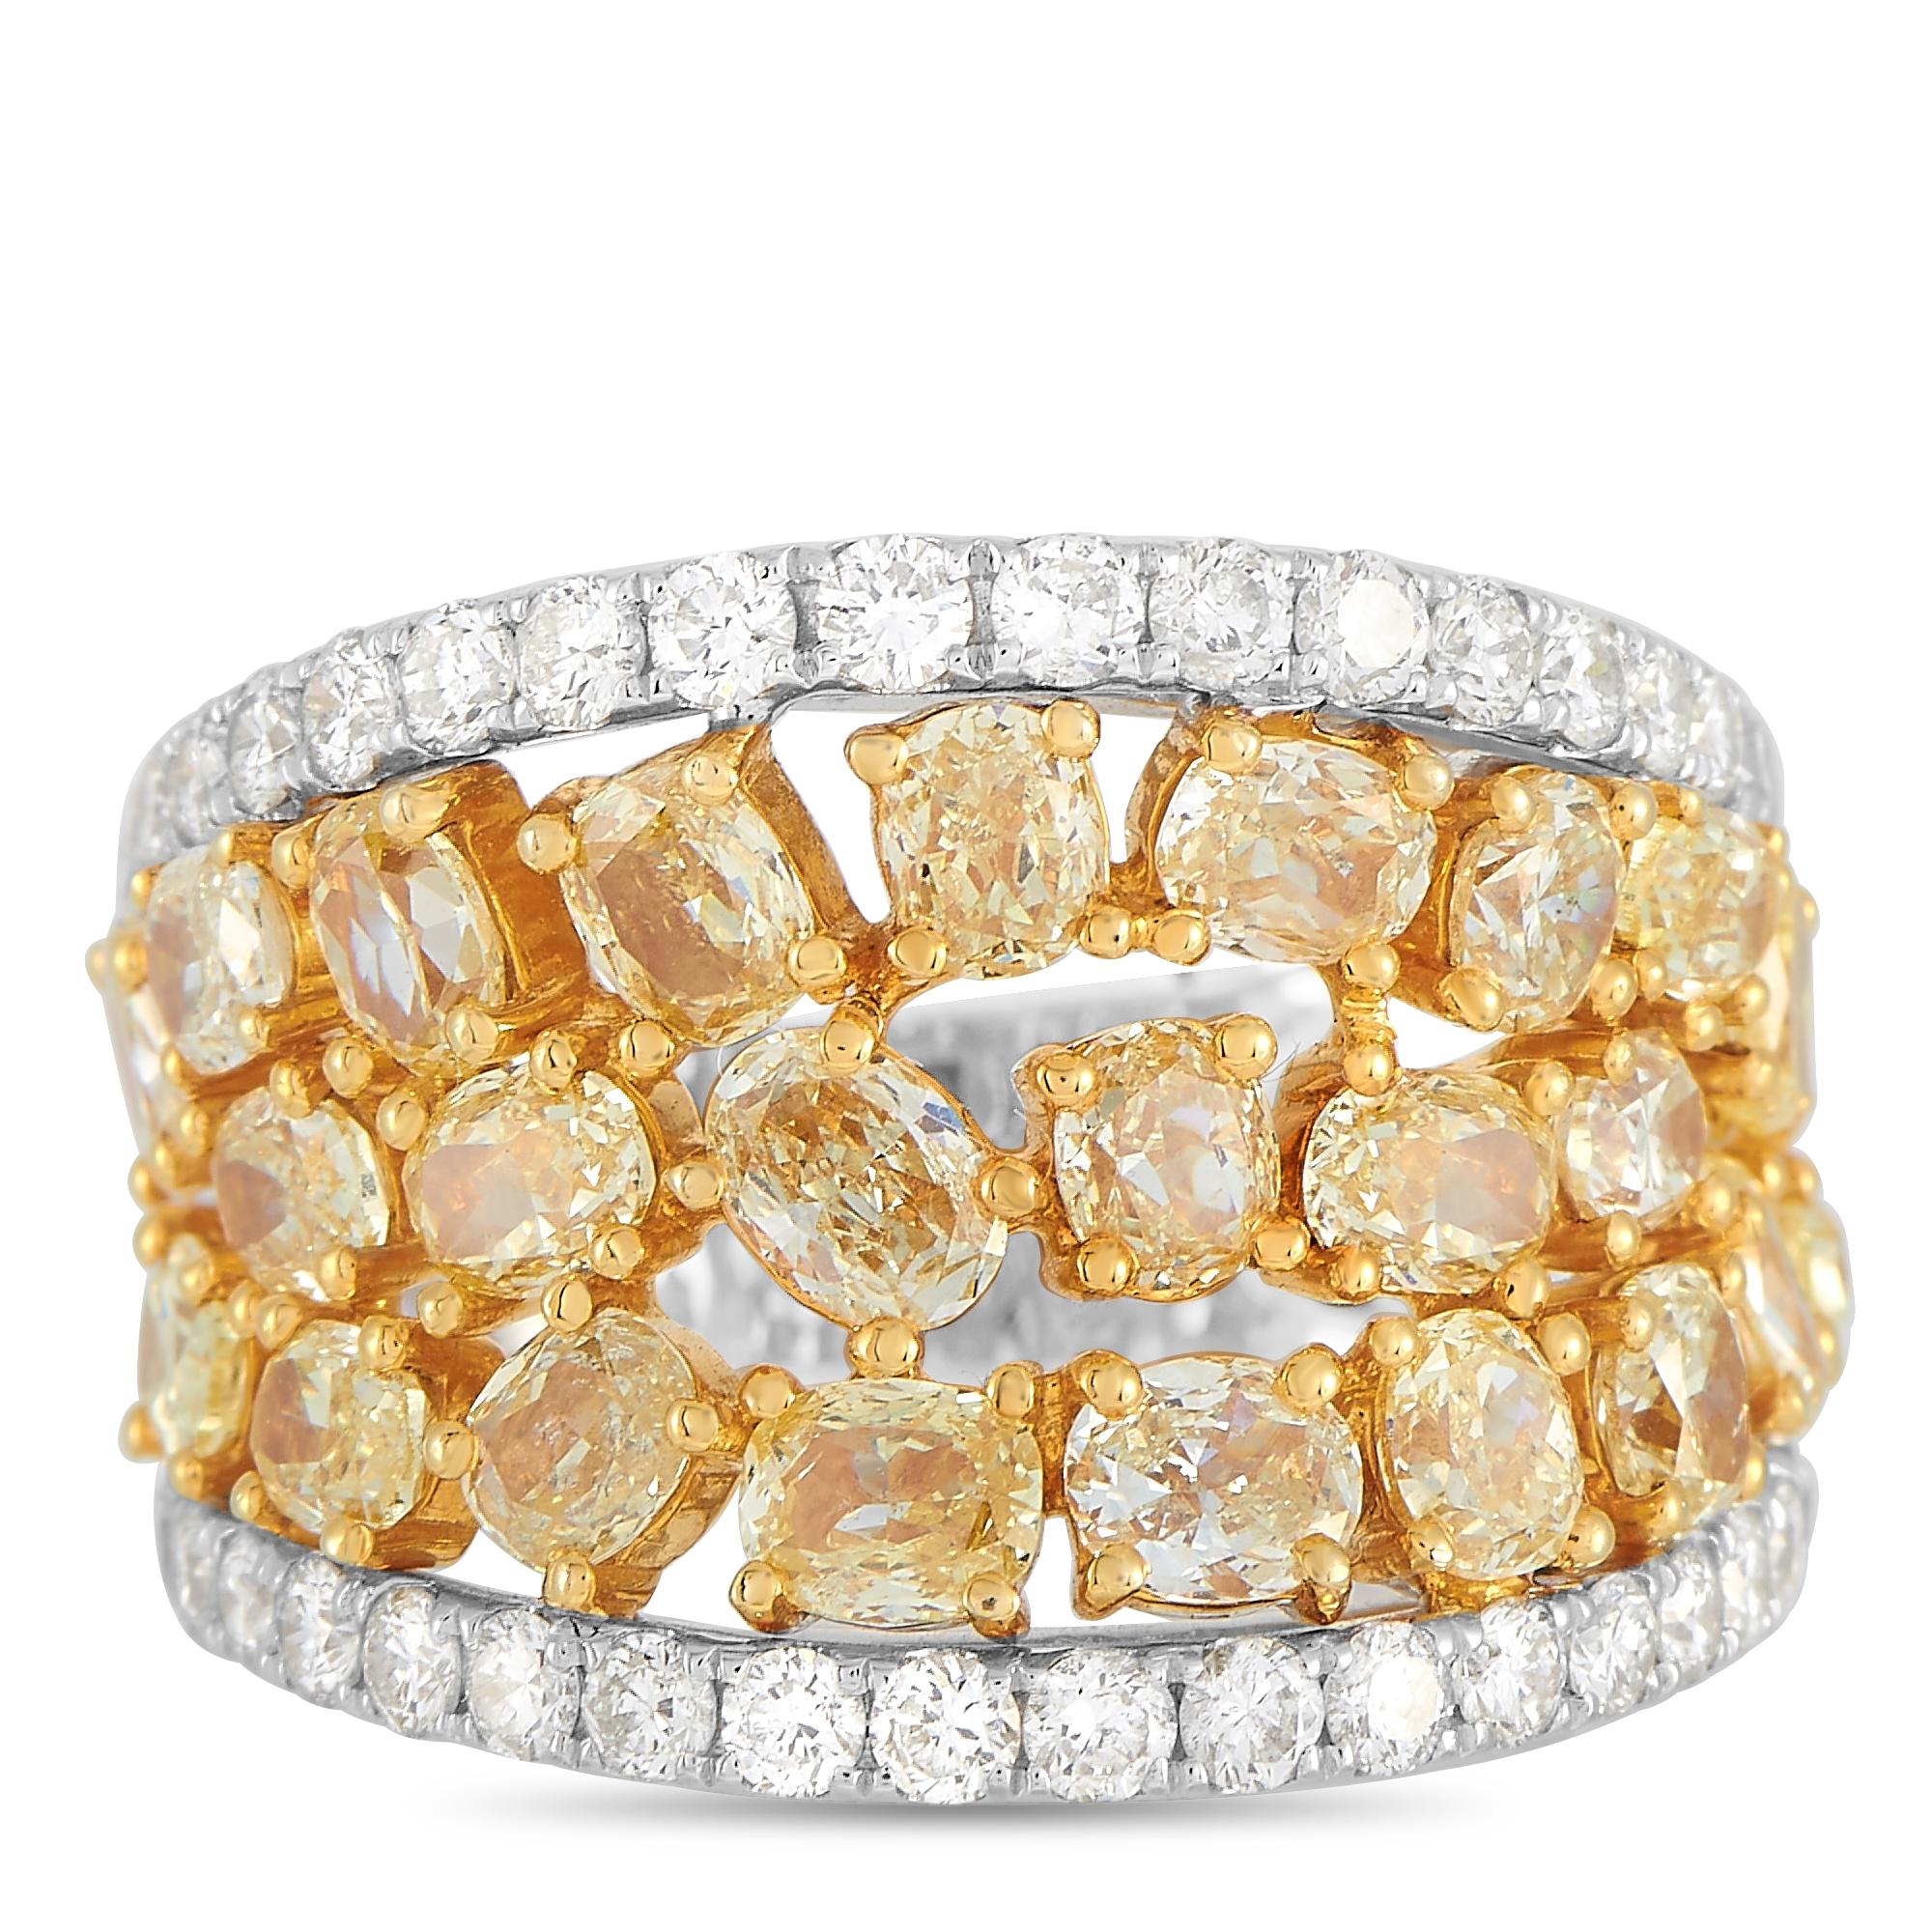 Women's LB Exclusive 18K White Gold 5.06 ct White and Fancy Yellow Diamond Wide Band Rin